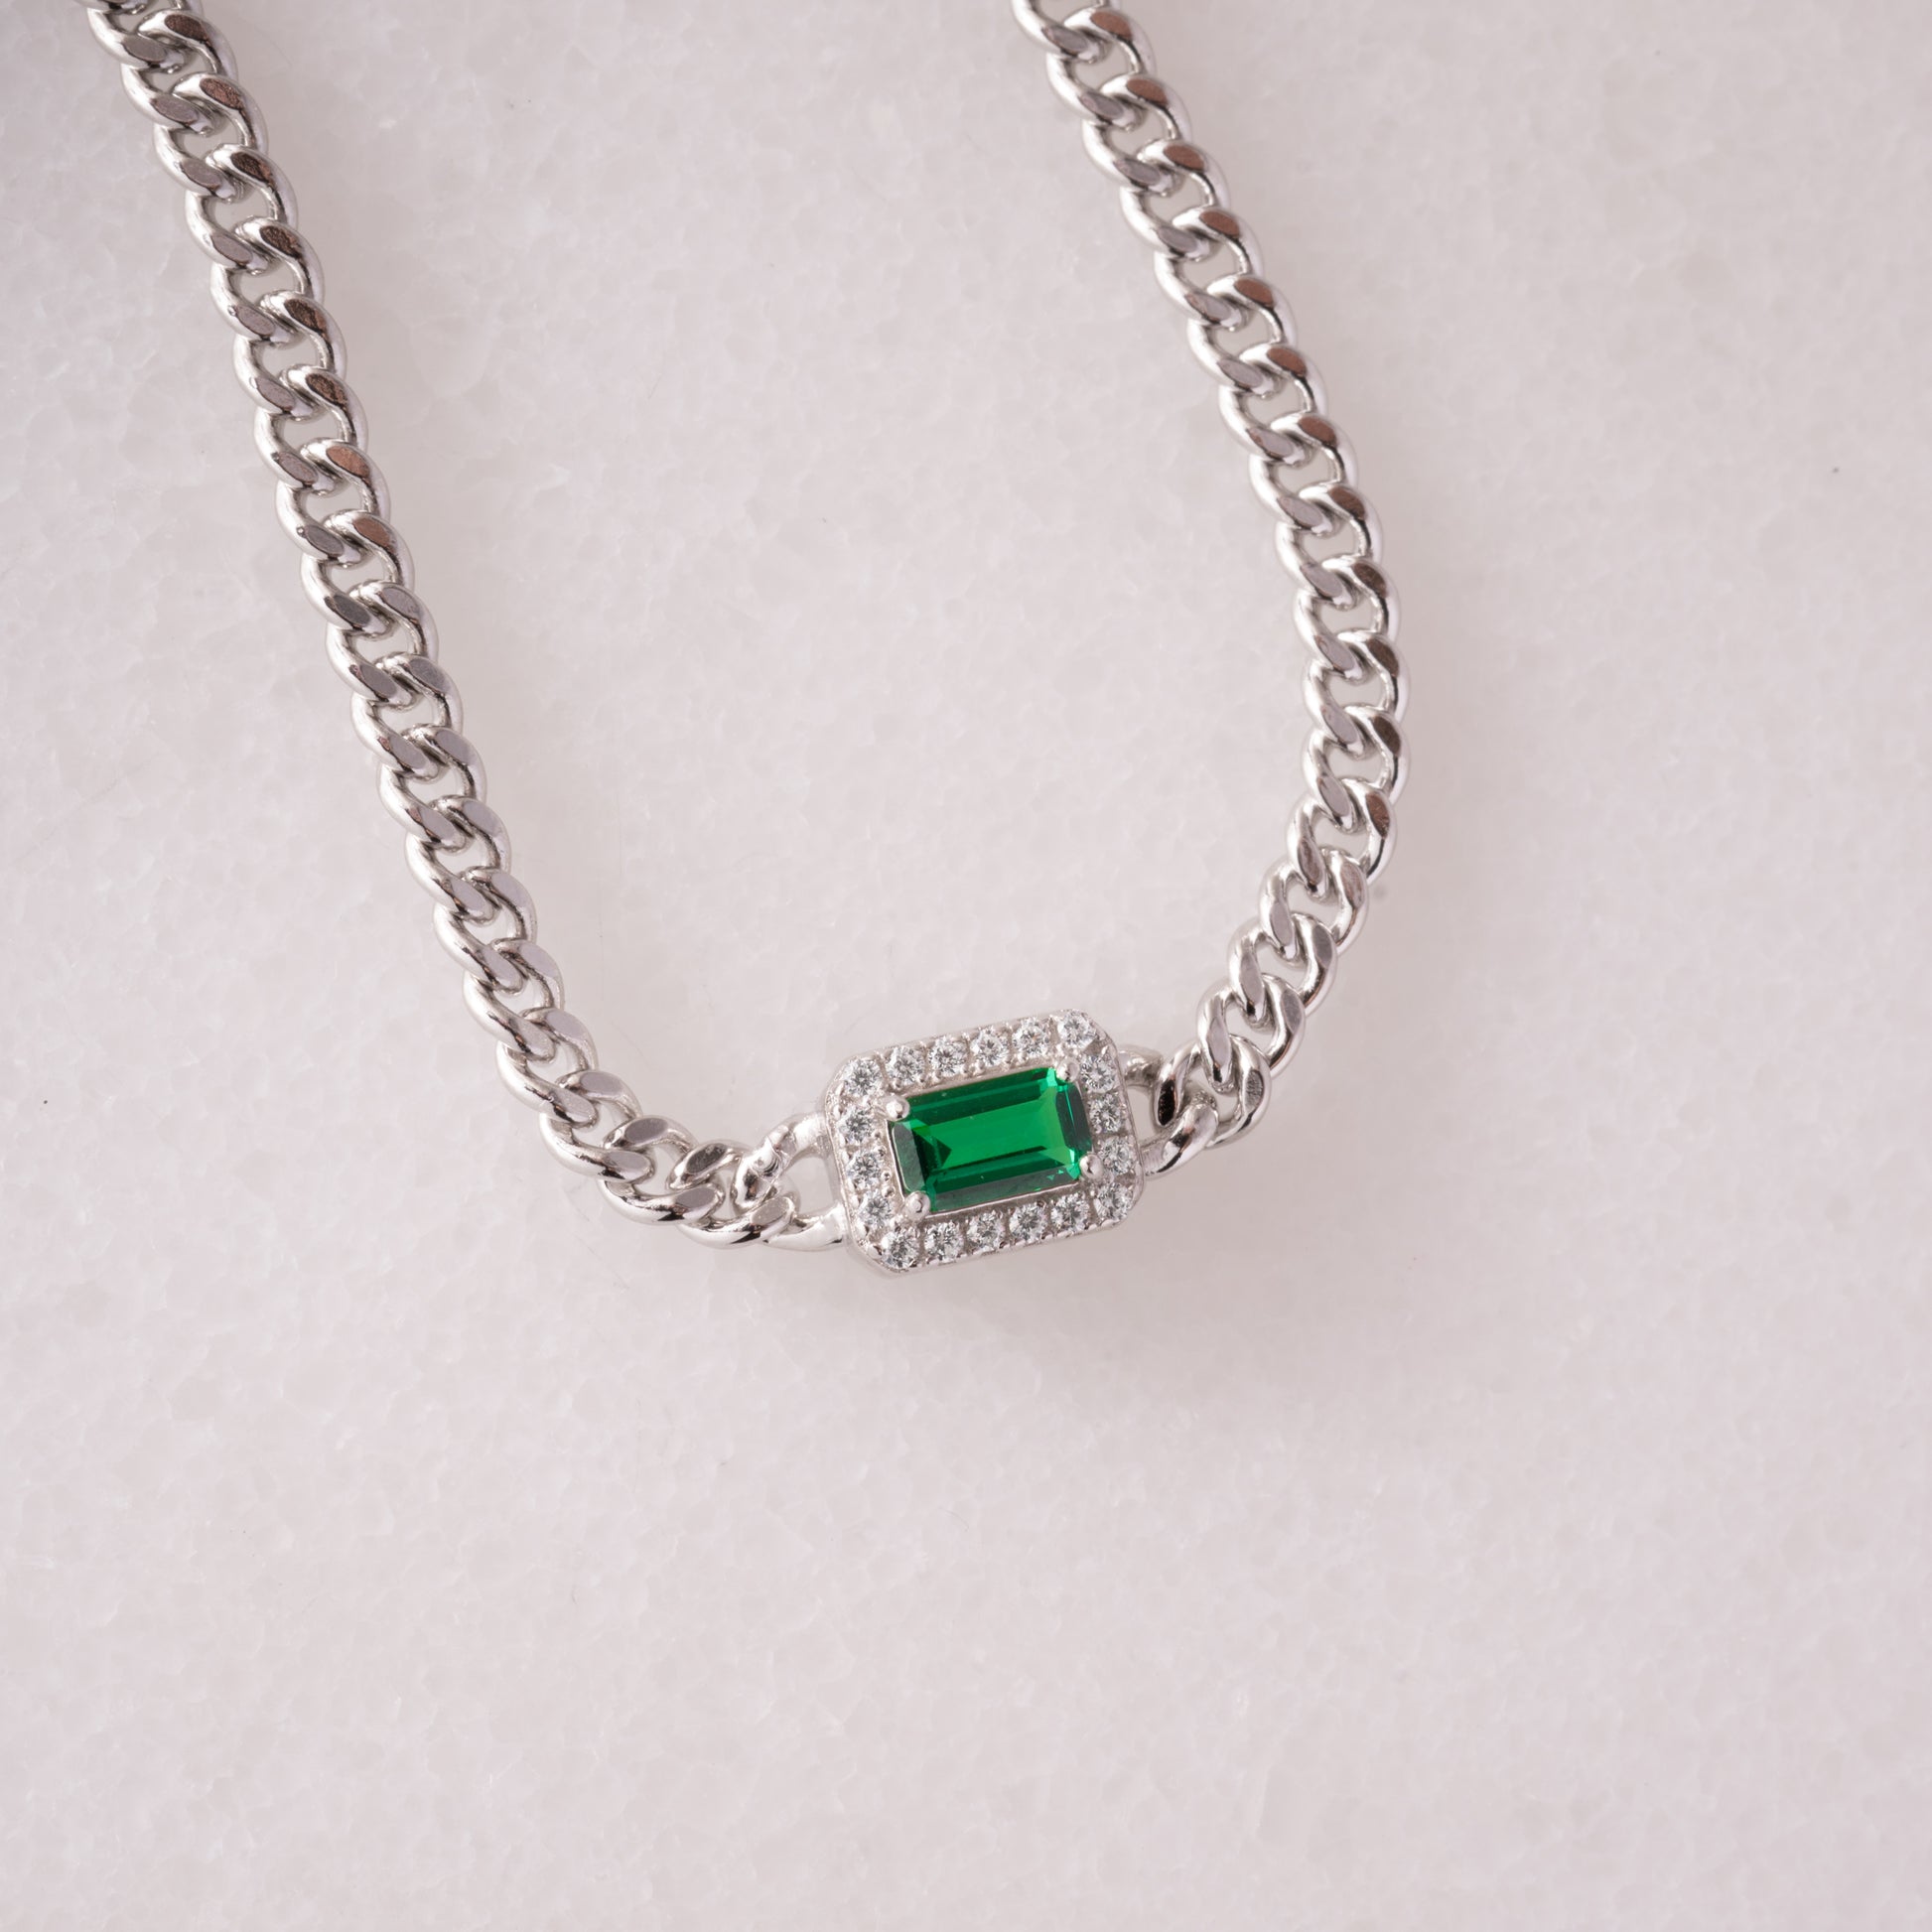 silver curb chain bracelet with emerald and diamond charm